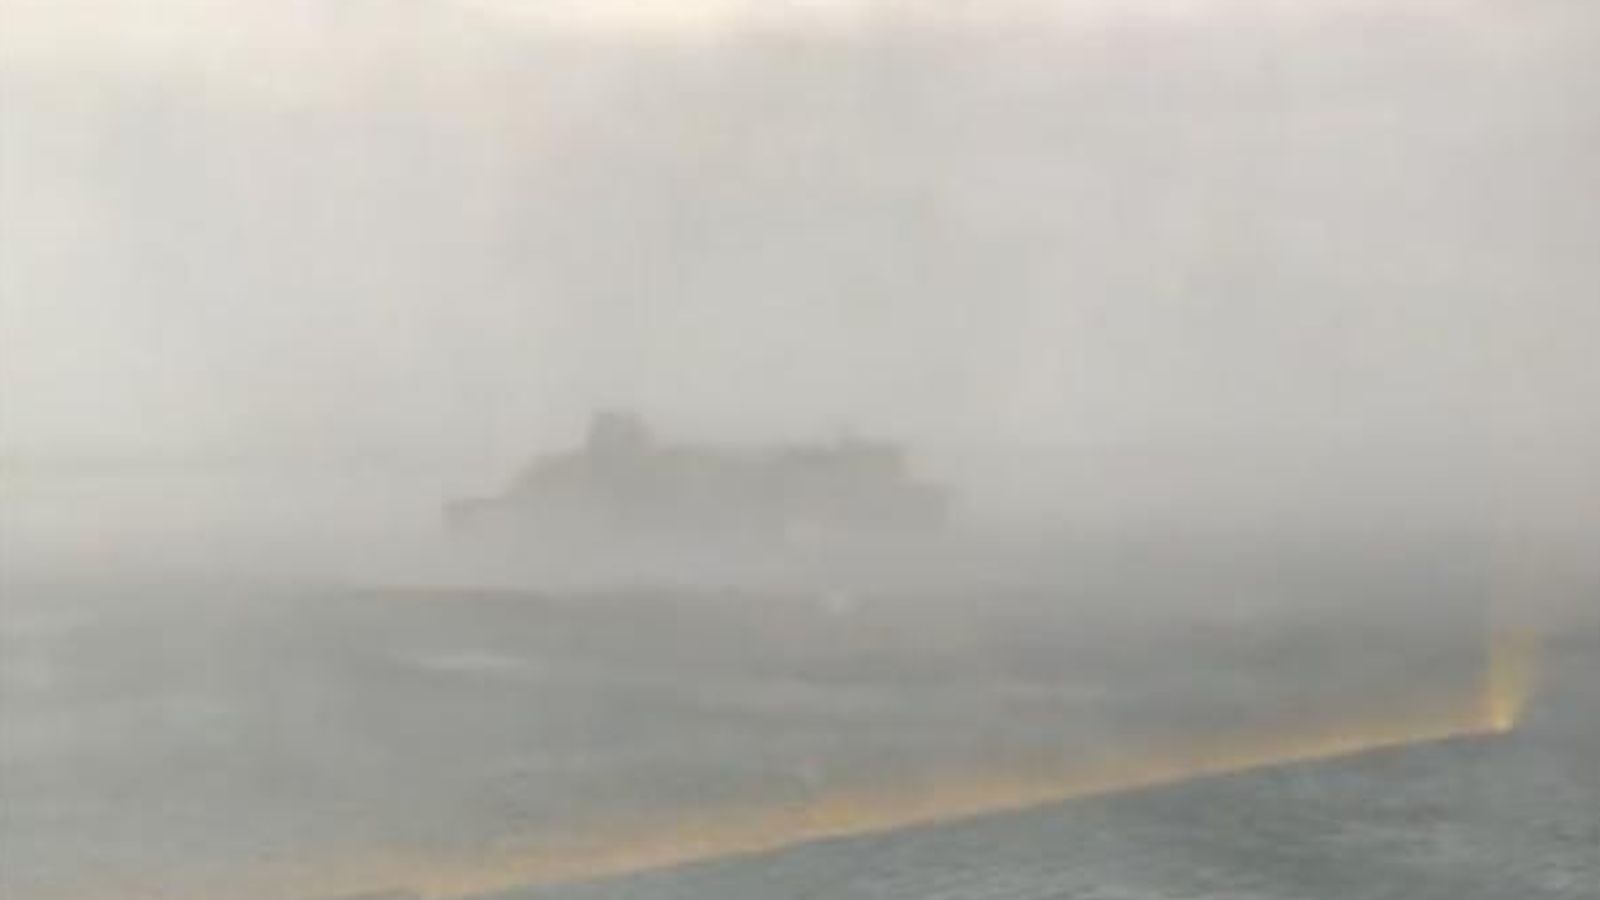 People injured after P&O cruise ship involved in 'weather-related incident' in Mallorca